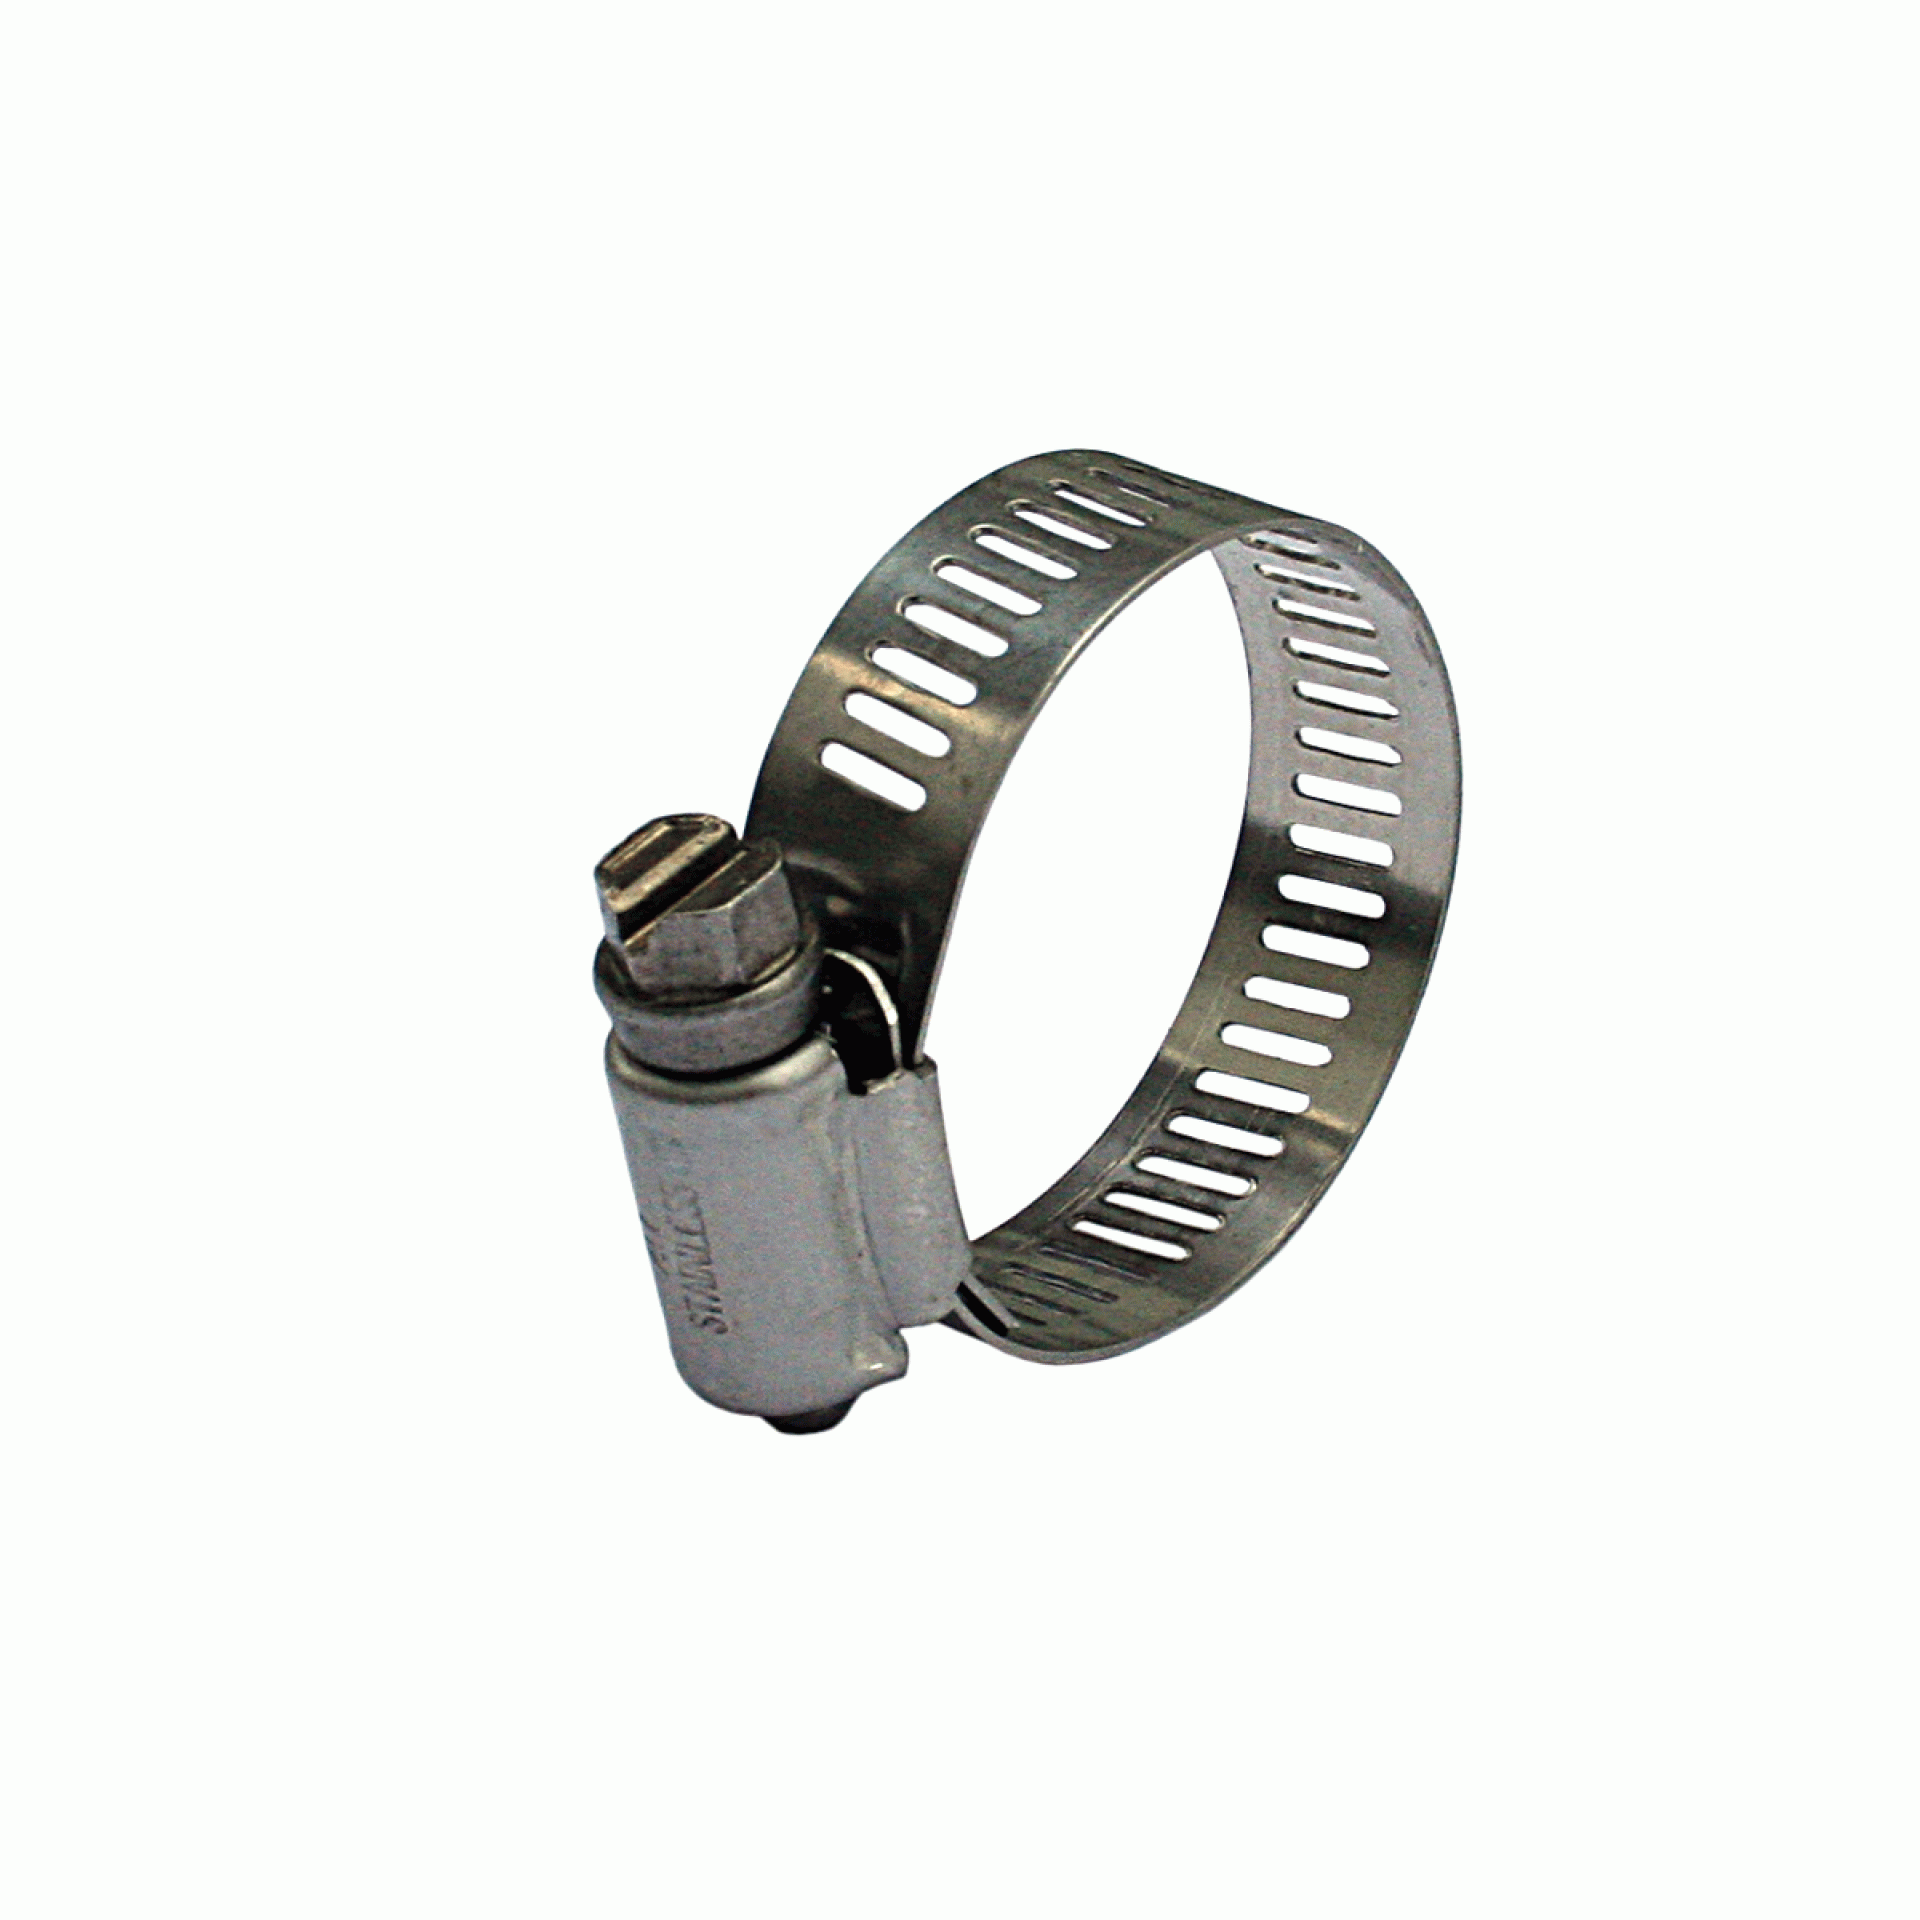 DUPAGE PRODUCTS GROUP | B32HS | DIA MIN 1-9/16" MAX 2-1/2" FITS HOSE: 1- 1/2" TO 2"